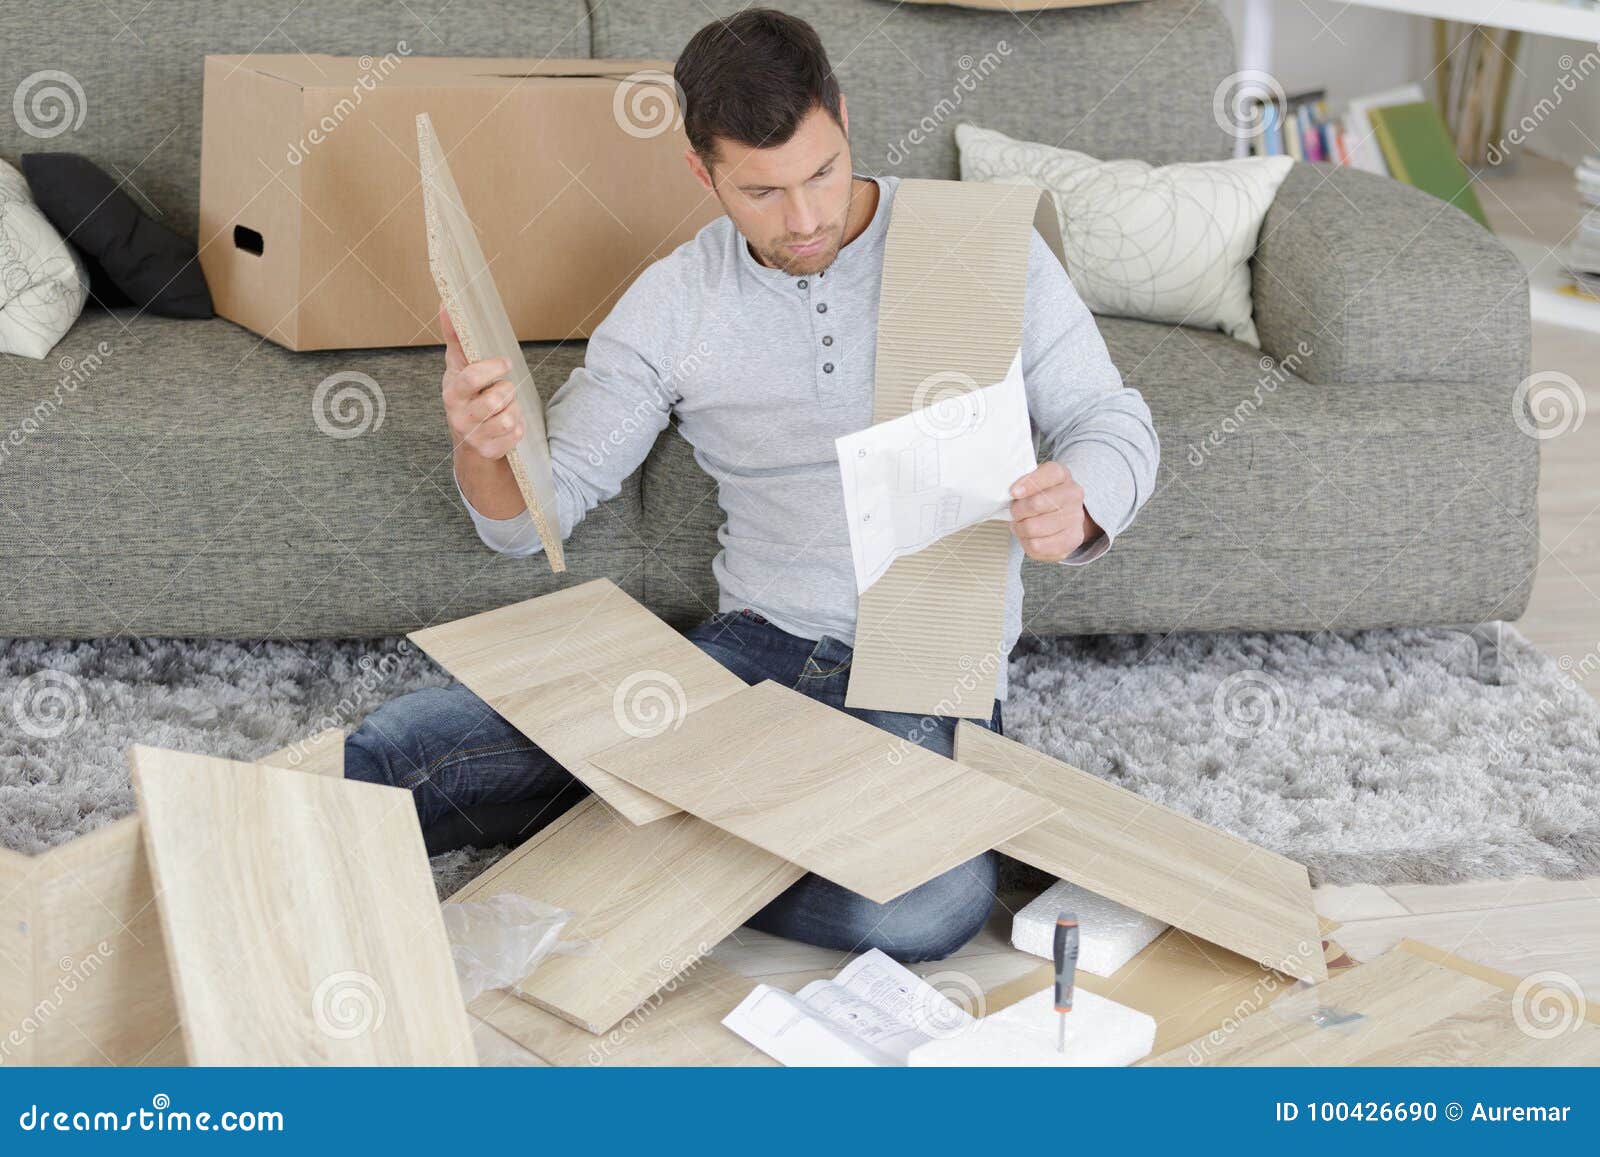 man surrounded by pieces flat pack furniture